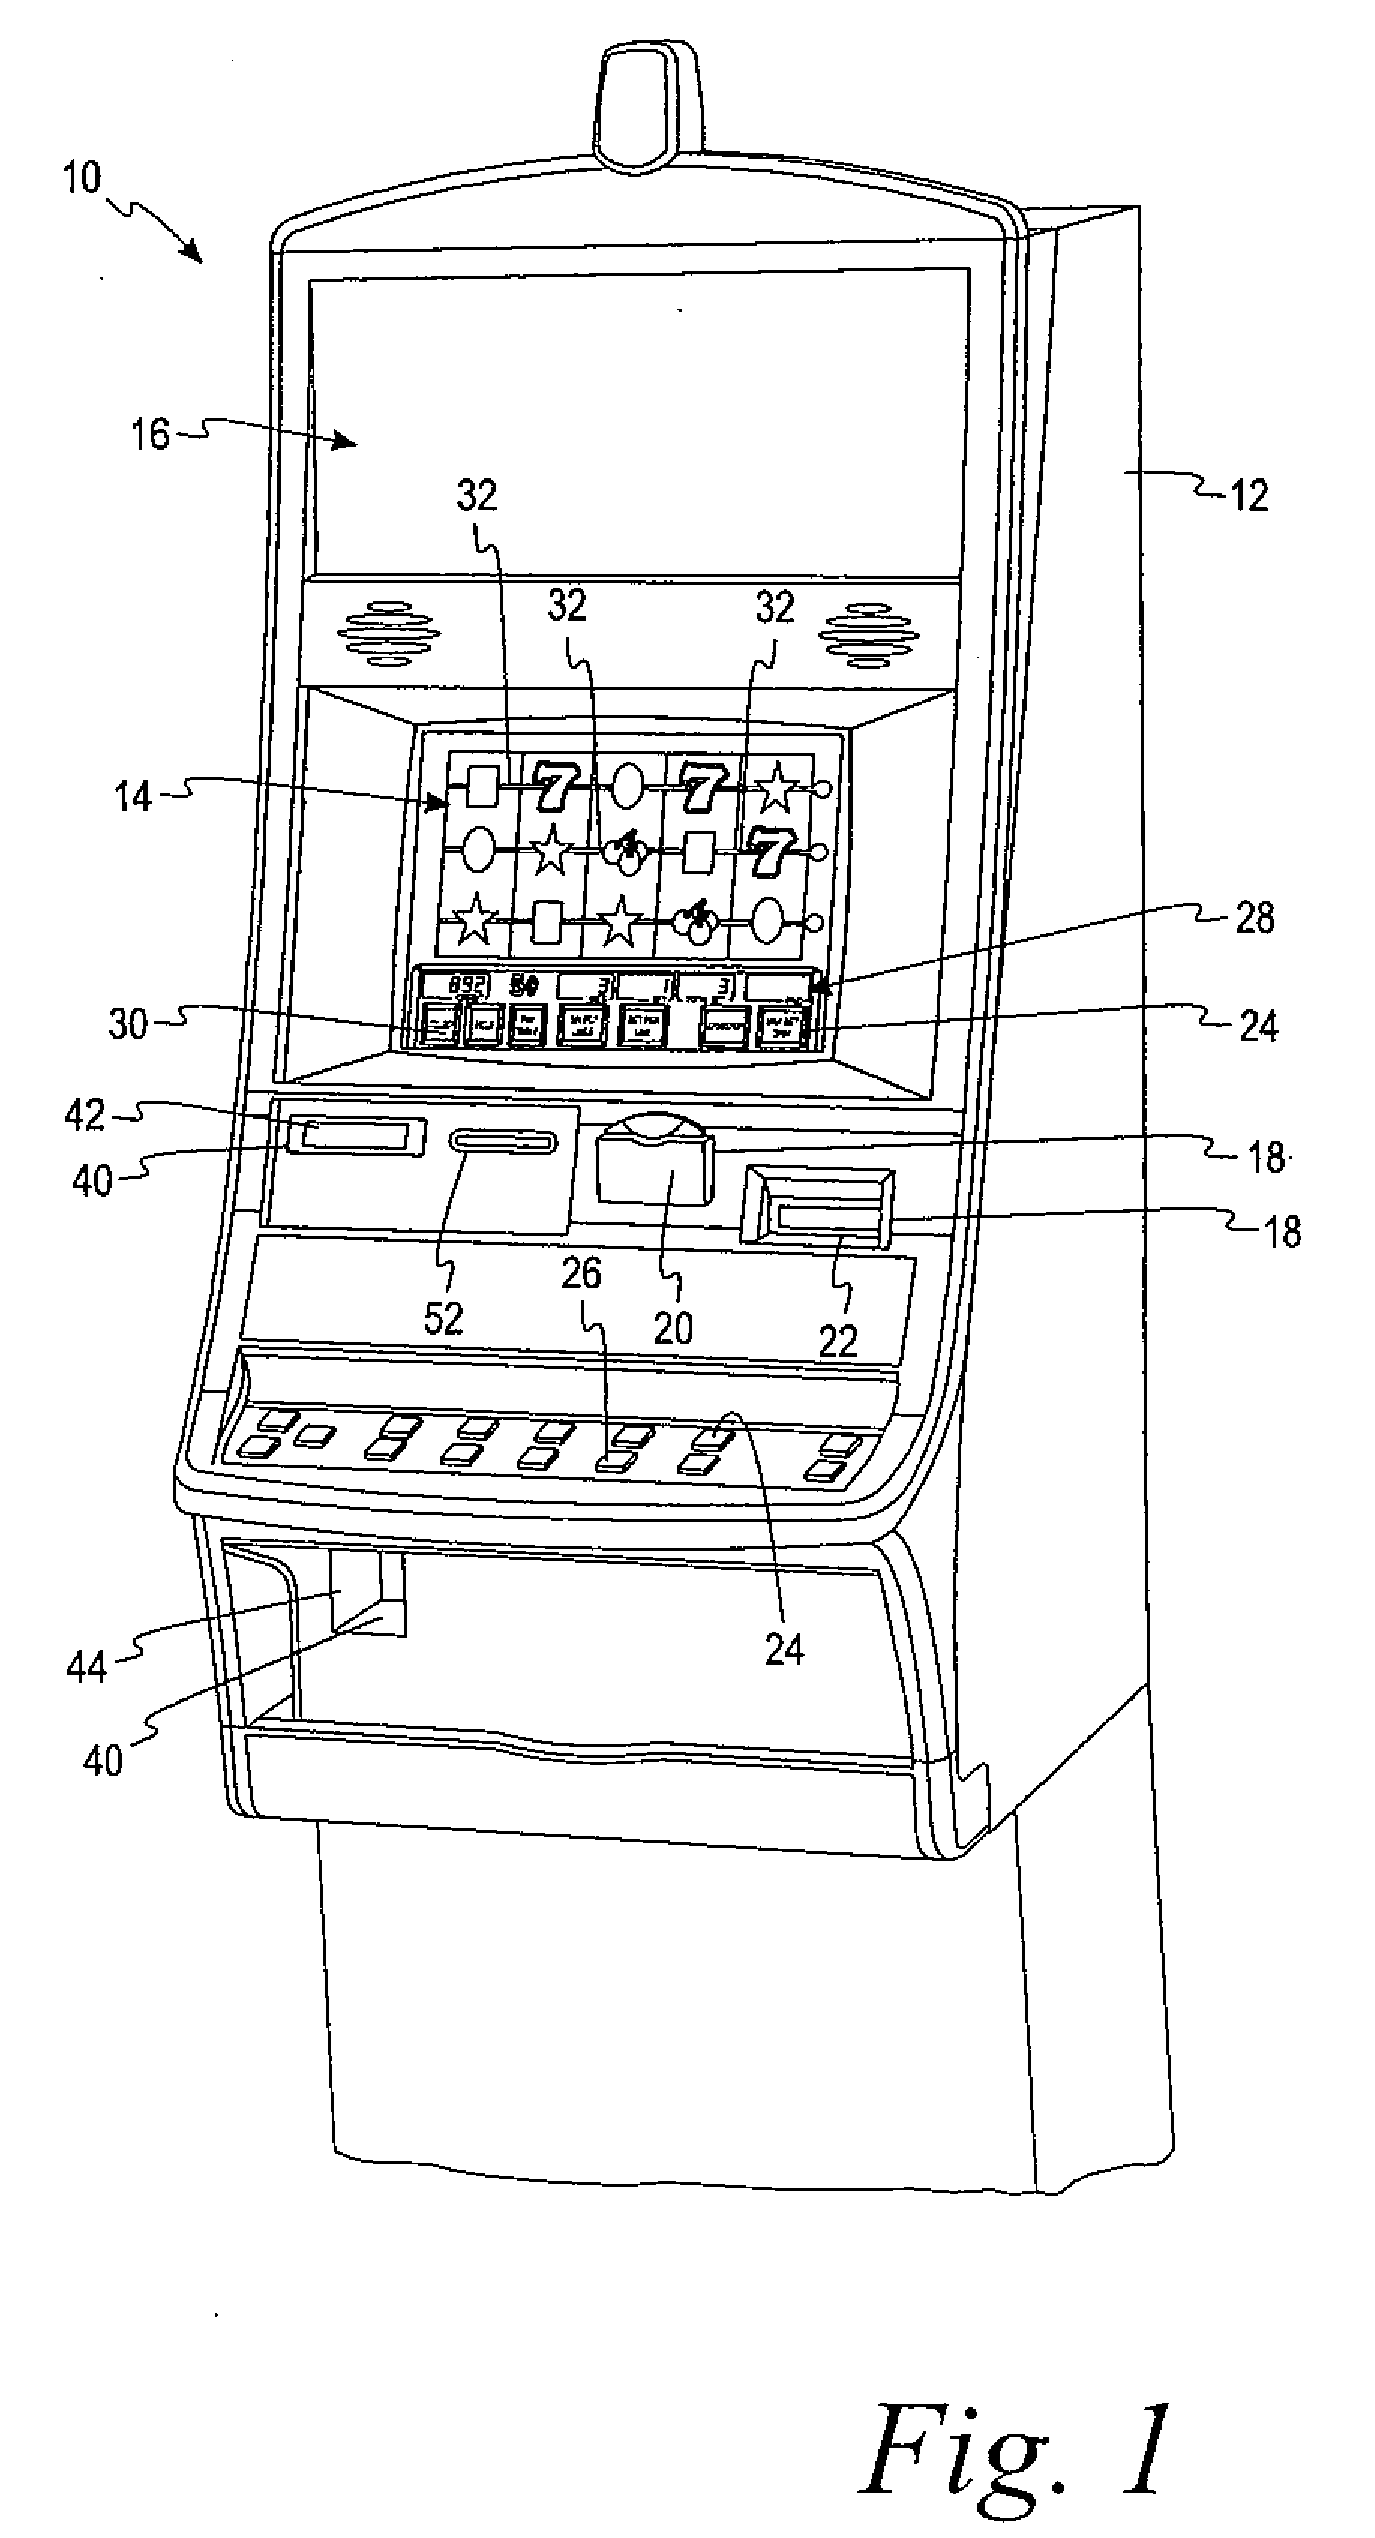 Wagering Game with Overlying Transmissive Display for Providing Enhanced Game Features